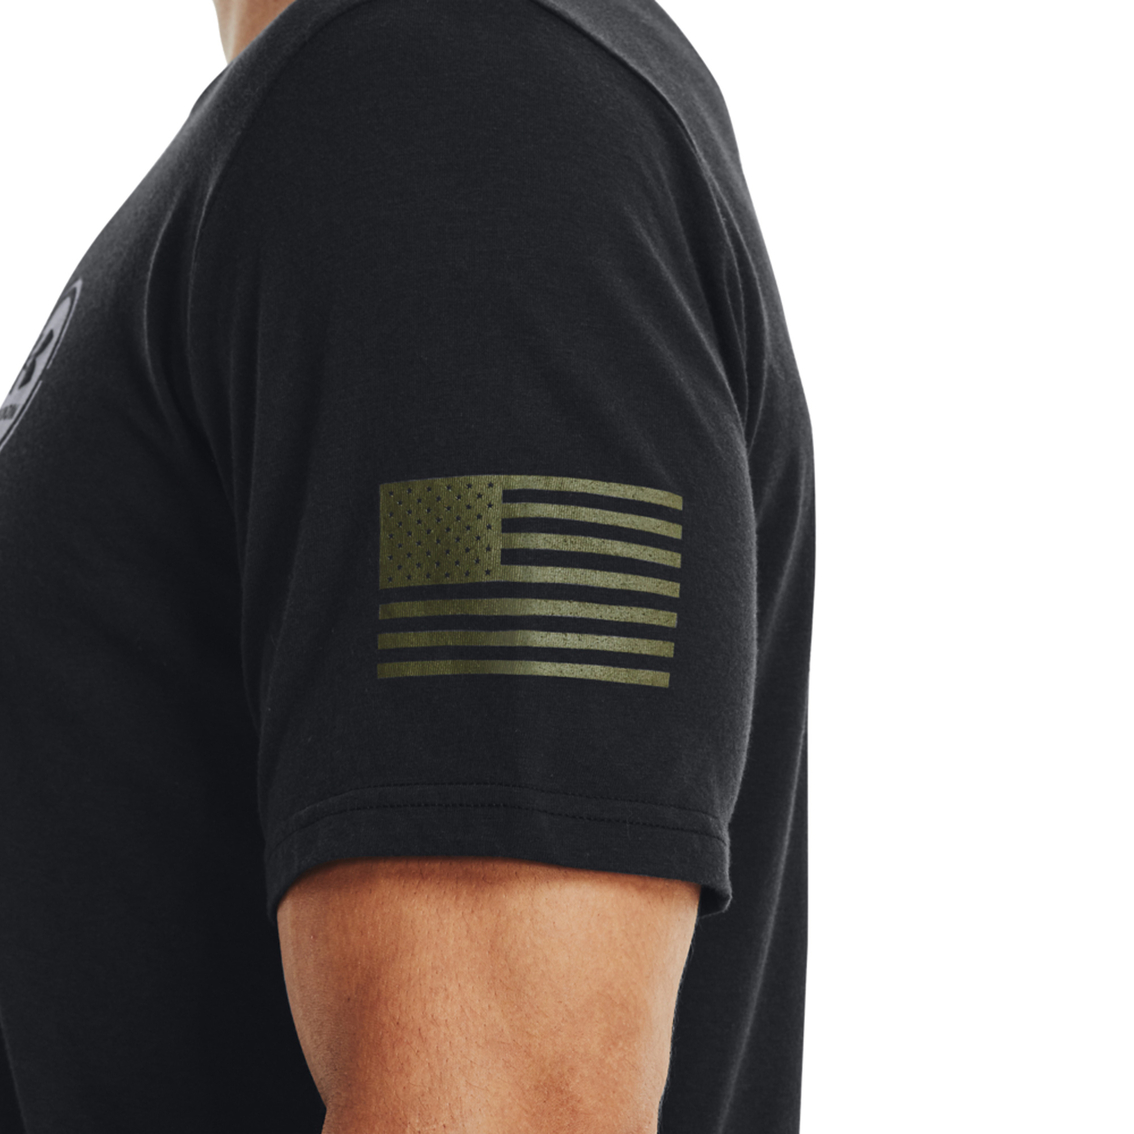 Under Armour Men's Tac Mission Made Tee - Image 4 of 6